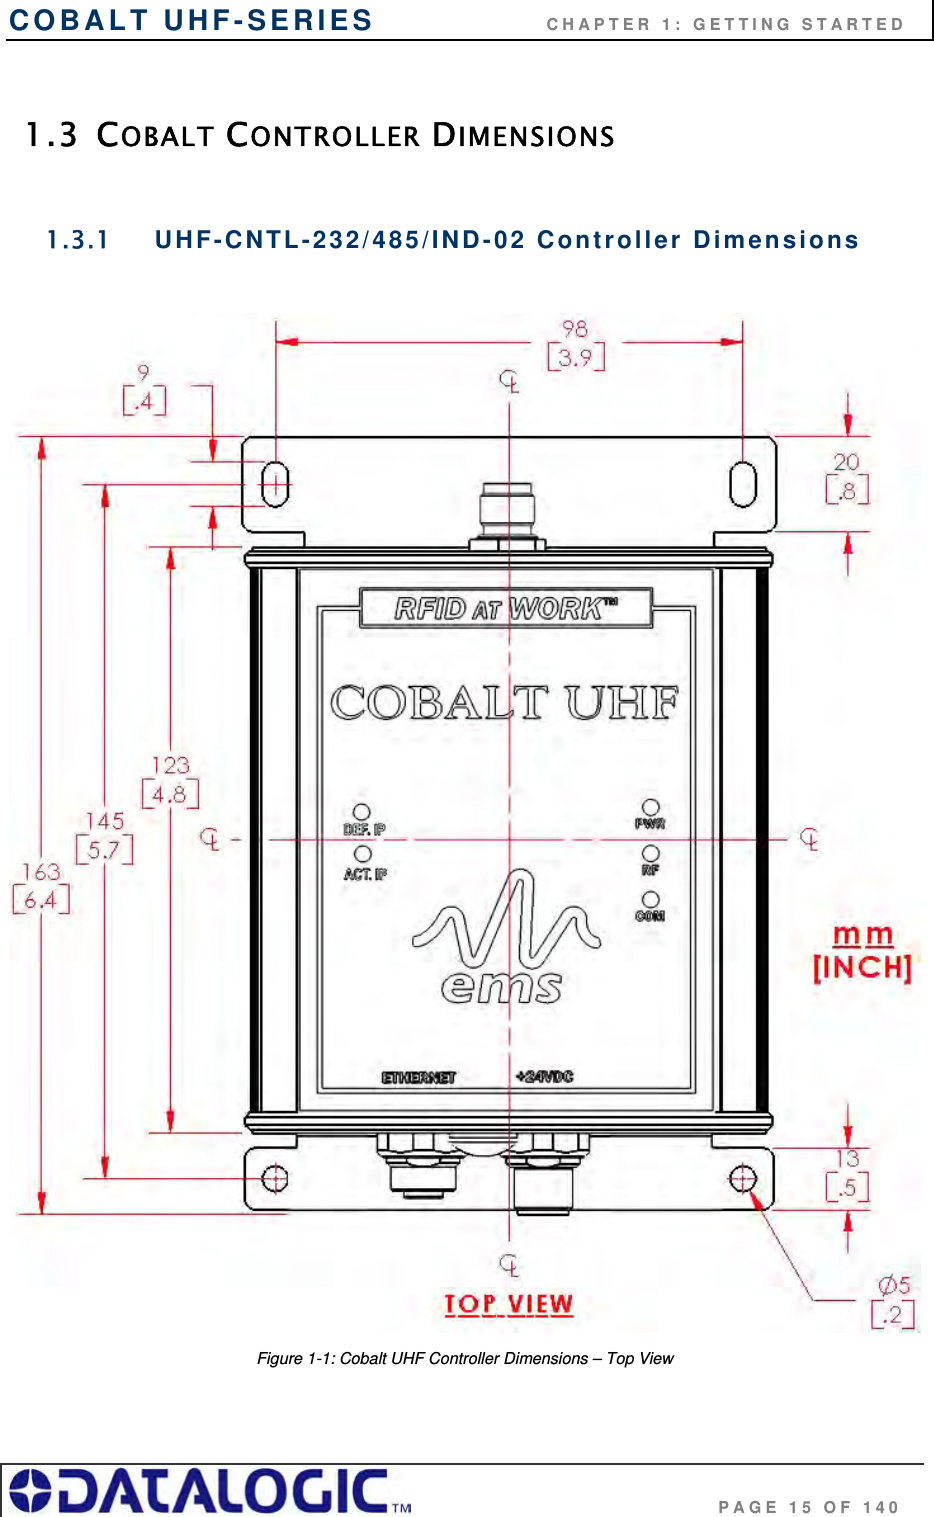 COBALT UHF-SERIES                    CHAPTER 1: GETTING STARTED                                     PAGE 15 OF 140  1.3 COBALT CONTROLLER DIMENSIONS  1.3.1 UHF-CNTL-232/485/IND-02 Controller Dimensions   Figure 1-1: Cobalt UHF Controller Dimensions – Top View  